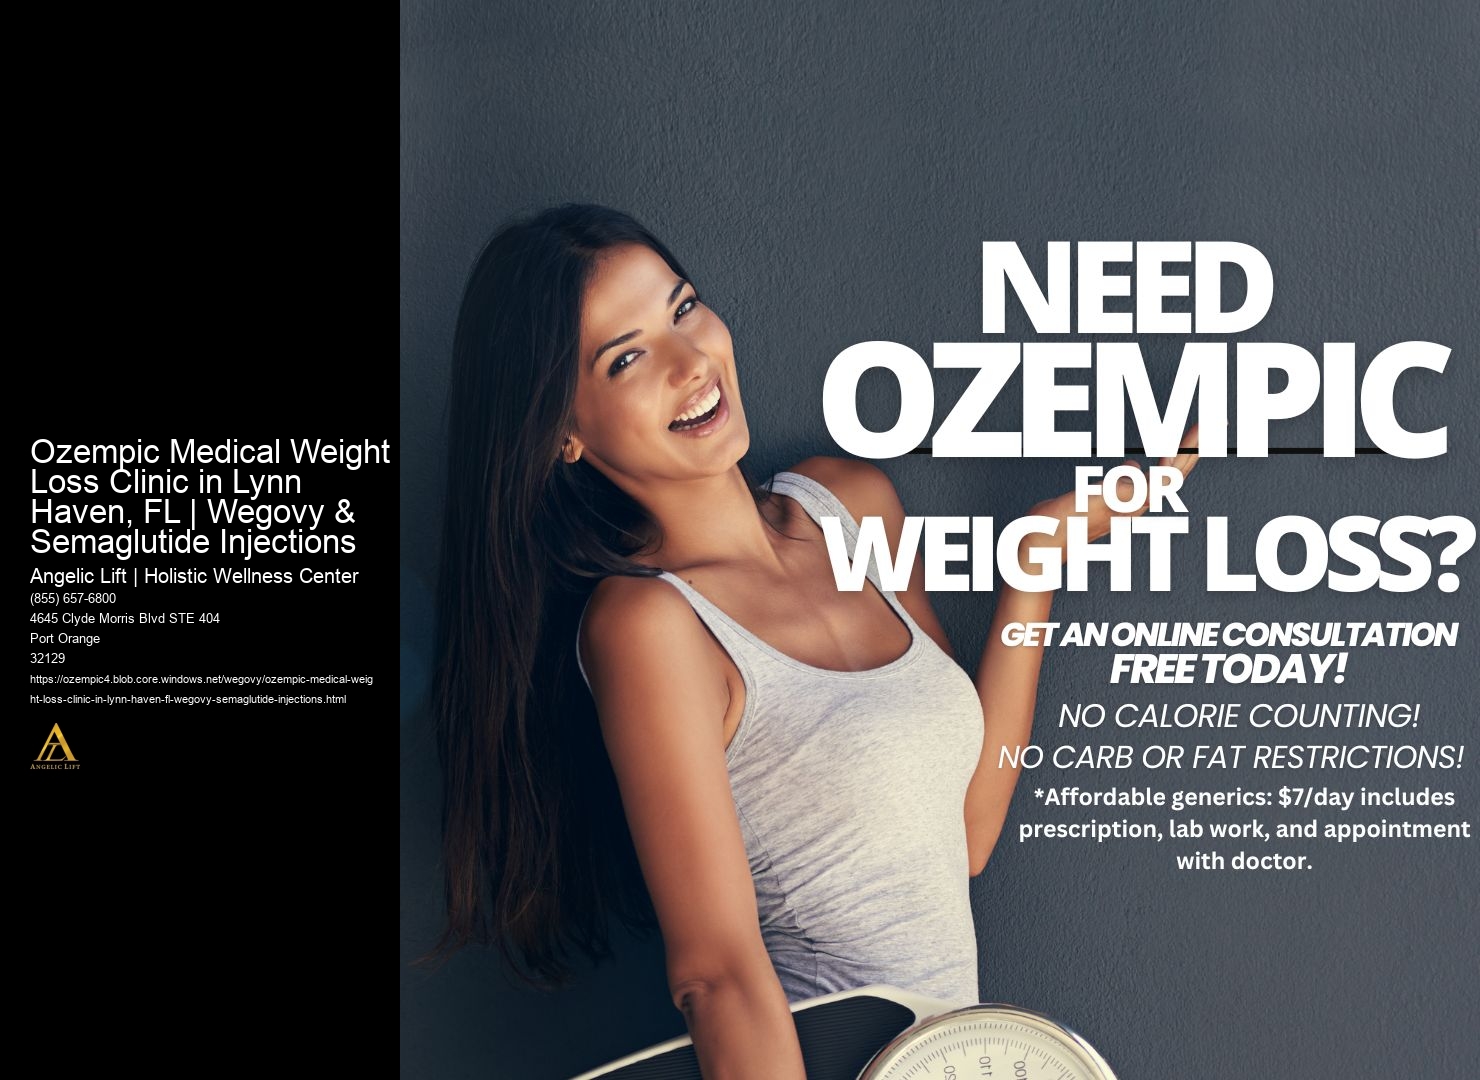 Ozempic Medical Weight Loss Clinic in Lynn Haven, FL | Wegovy & Semaglutide Injections